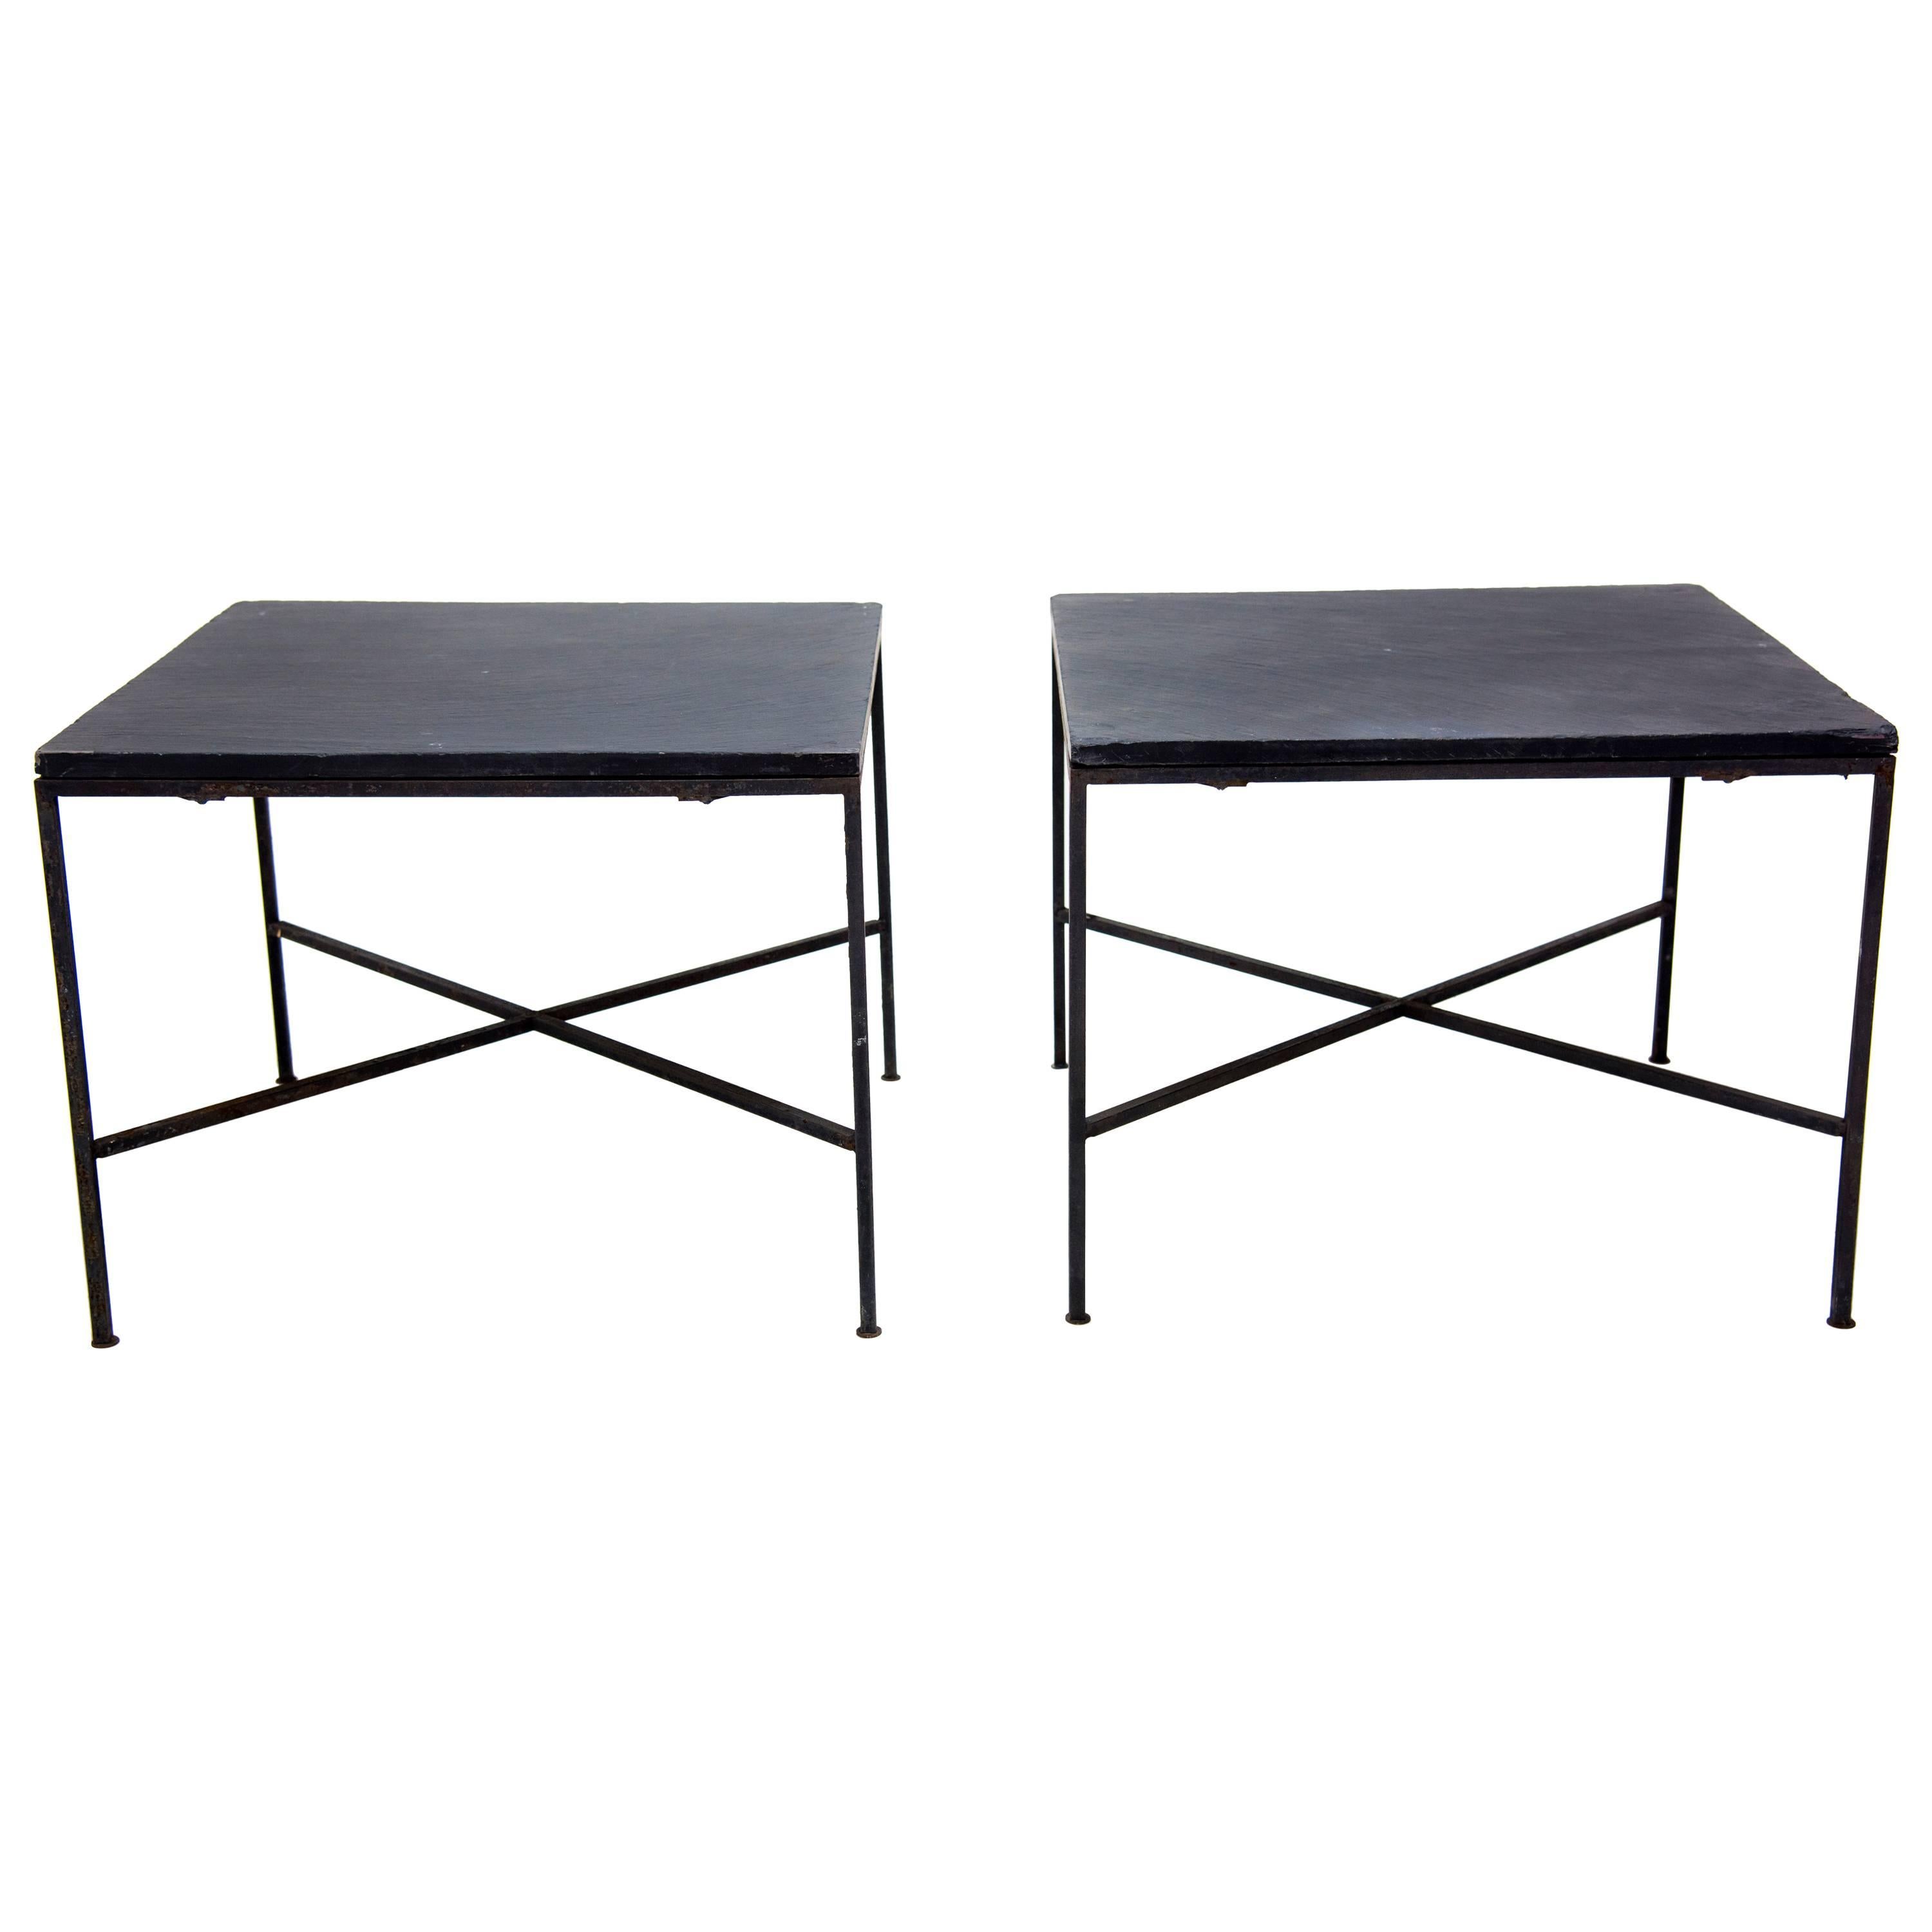 Pair of Iron and Slate Mid-Century Modern End Tables in the Style of Paul McCobb